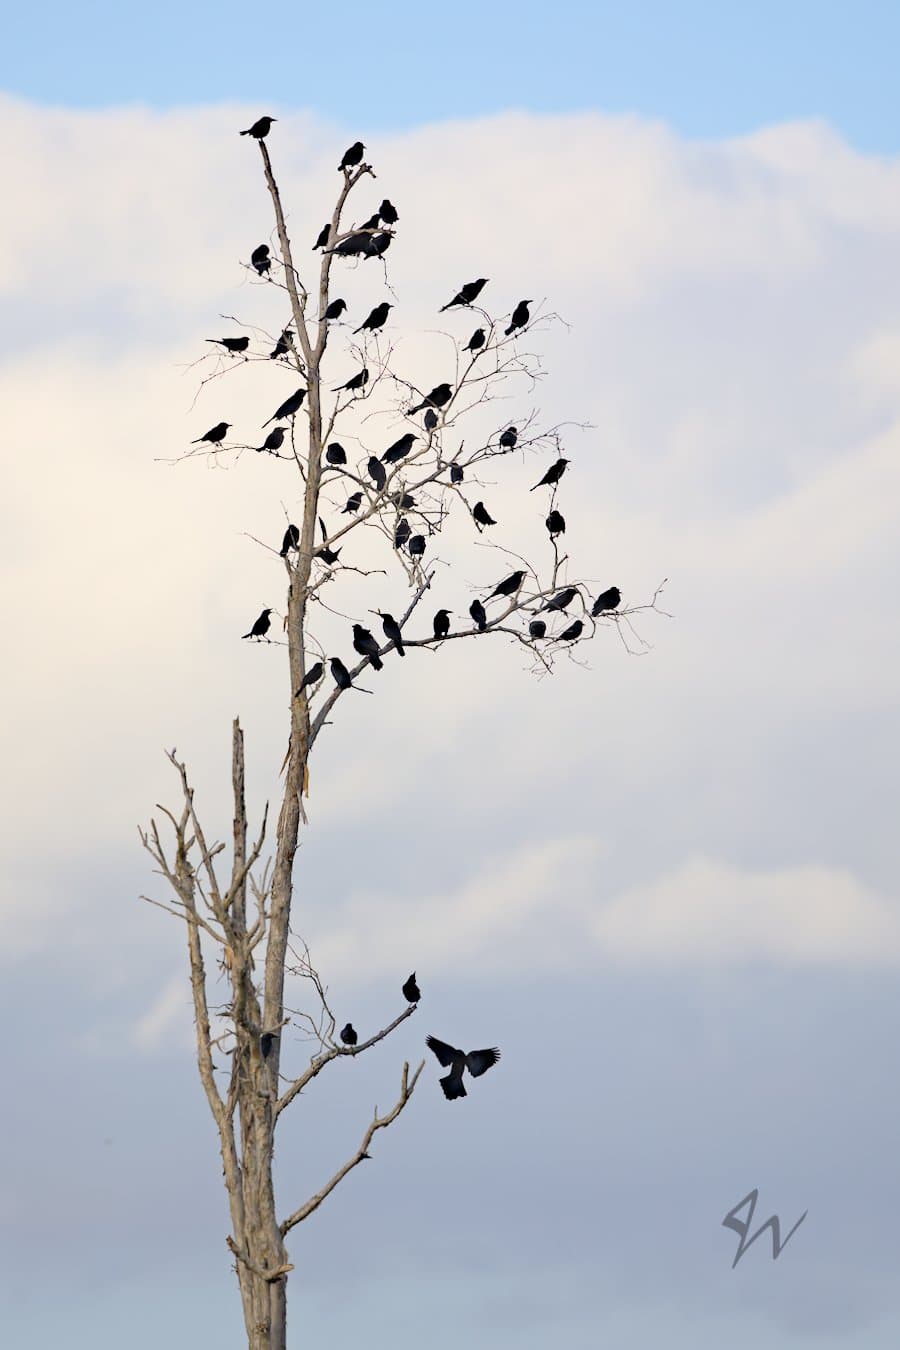 Nearly 50 Grackles perched evenly throughout bare tree looking like leaves against cloudy sky.